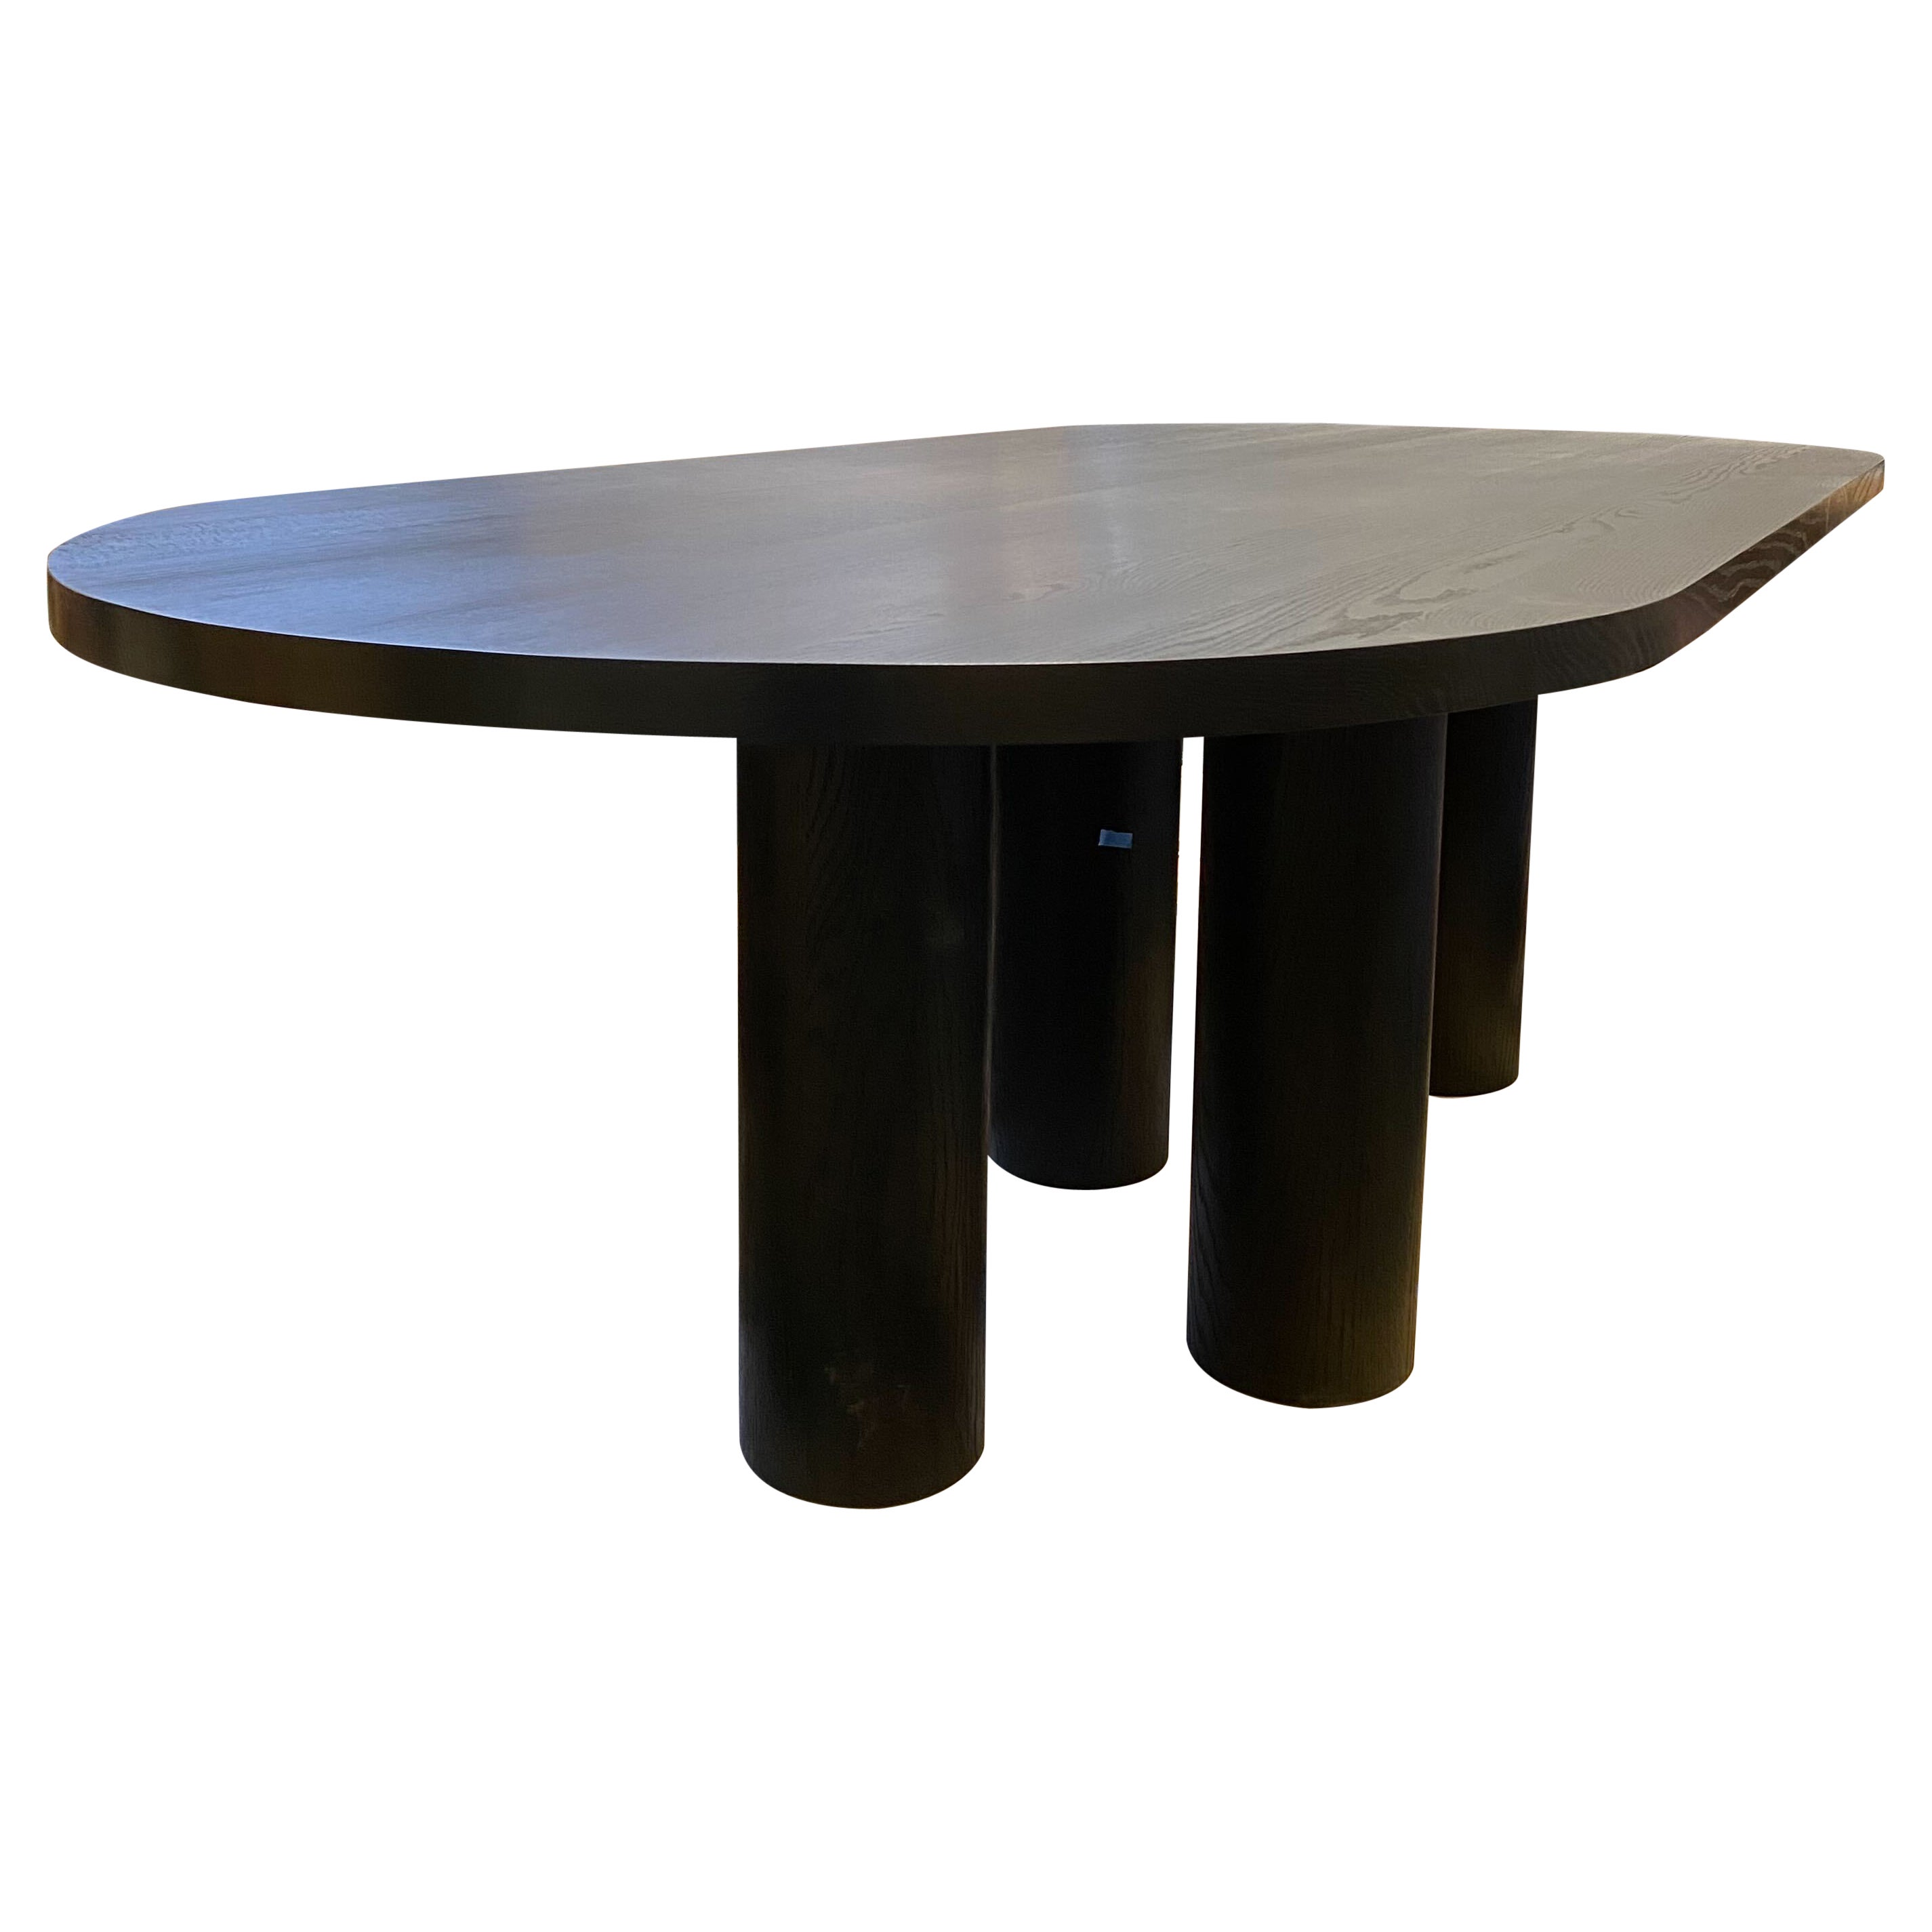 Solid Handcrafted Blackened Oak Eden Table 96"L Mary Ratcliffe Studio For Sale